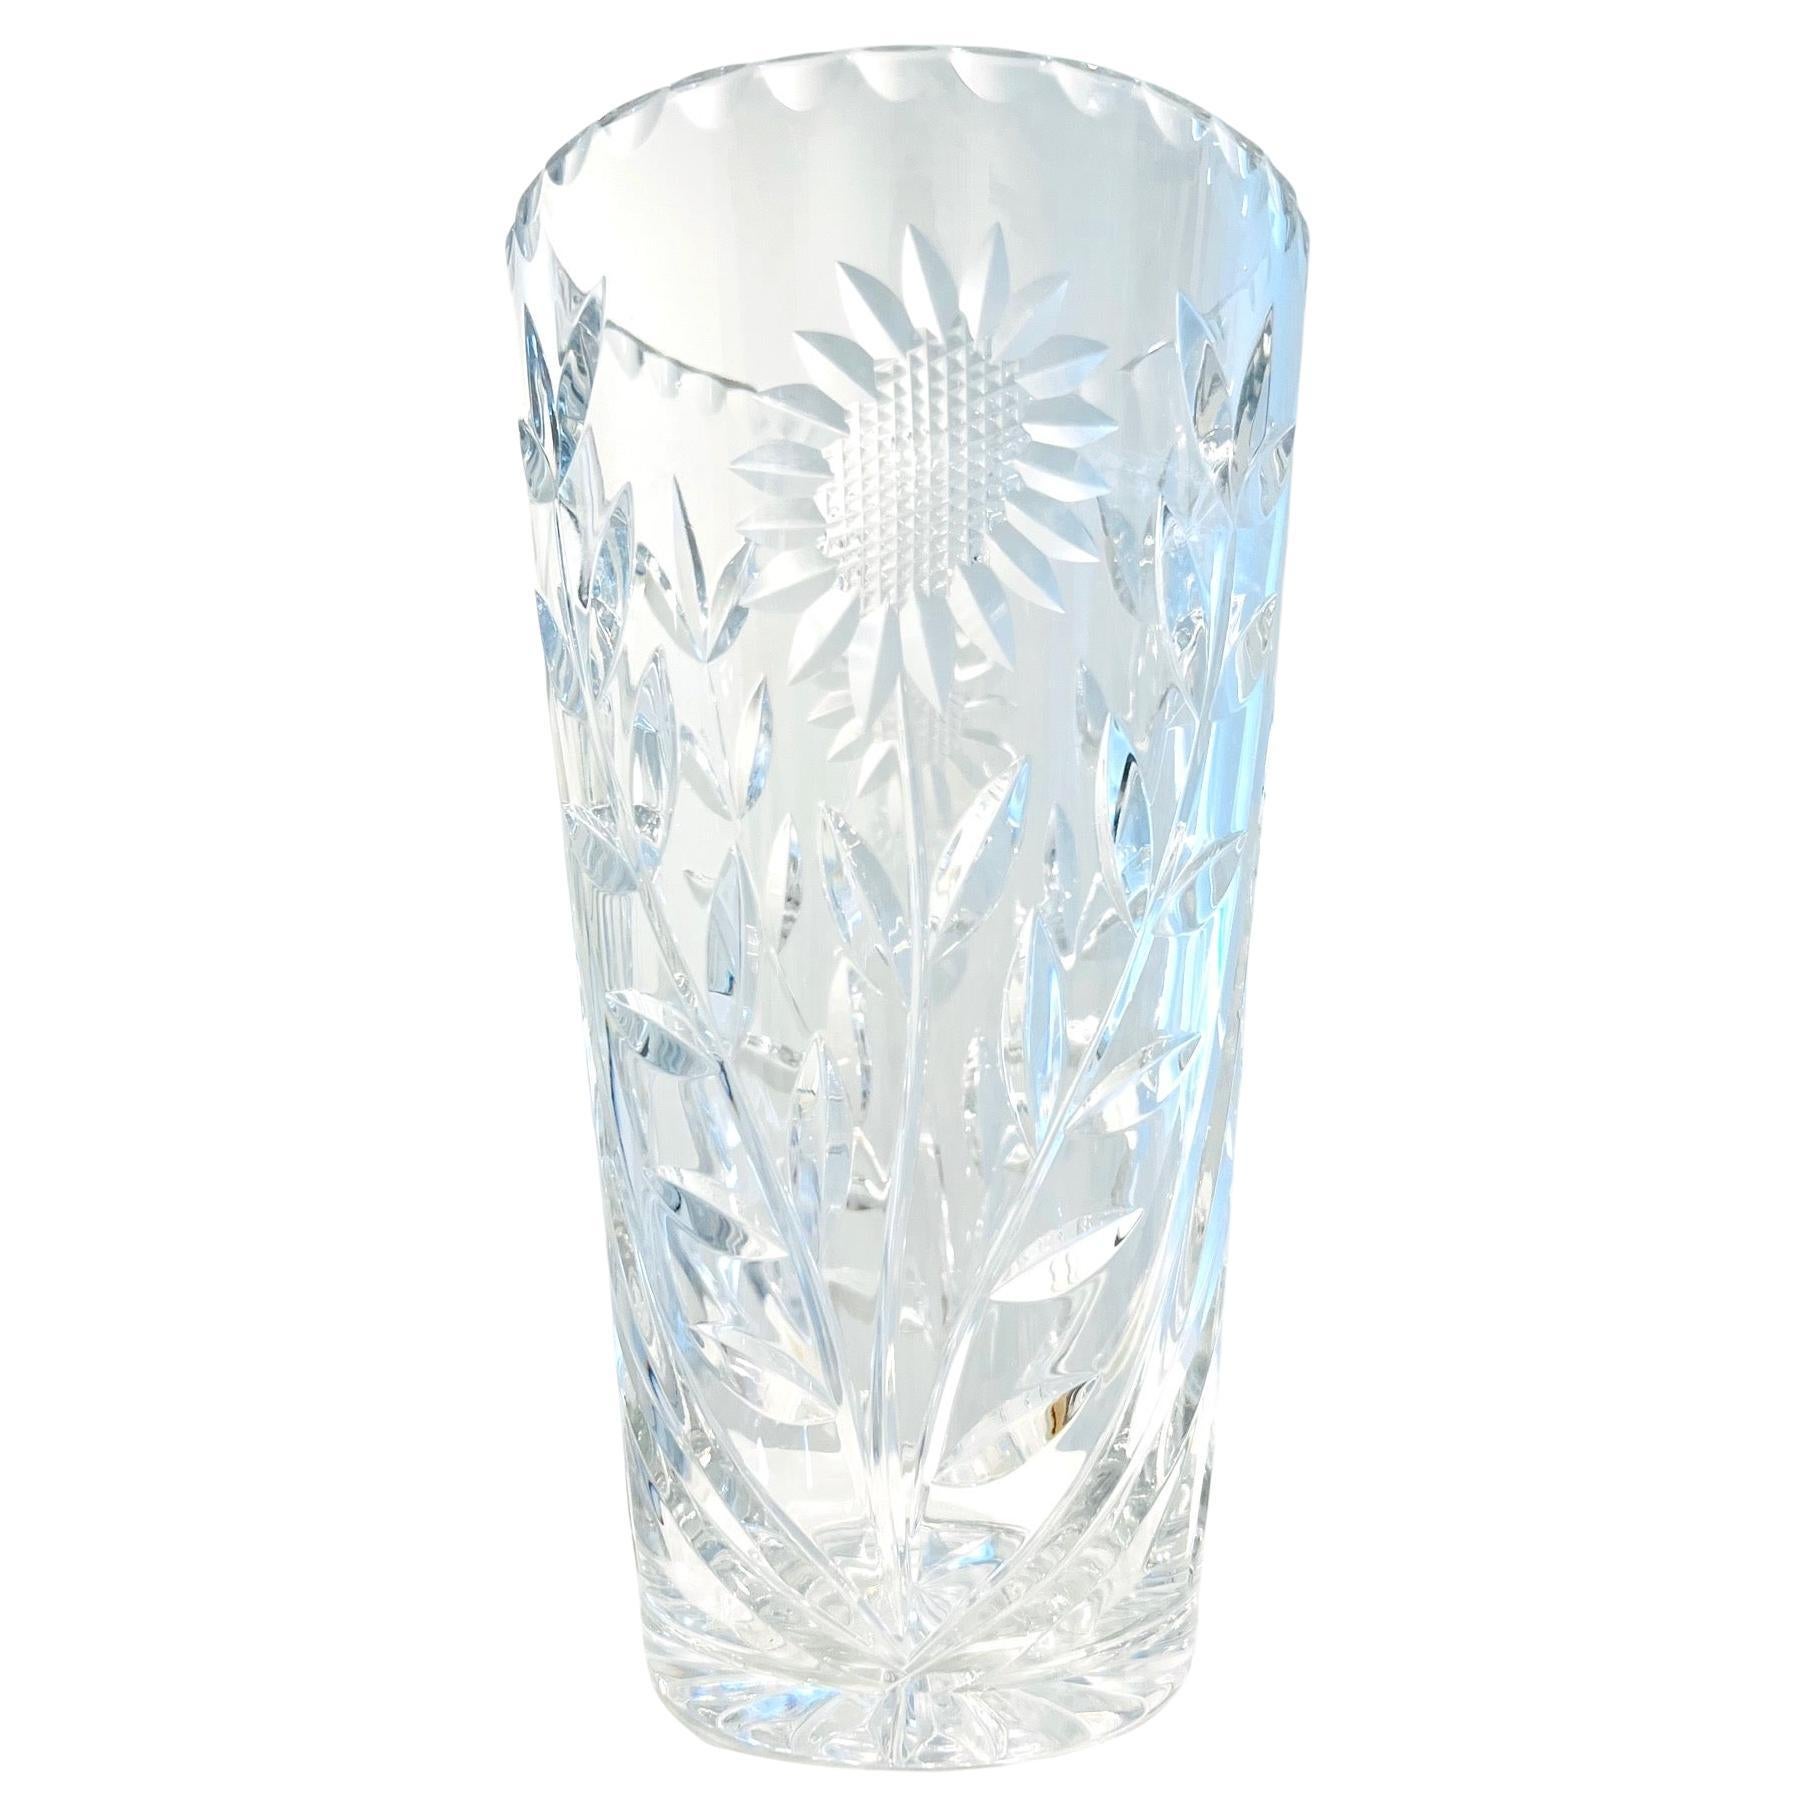 Waterford Crystal Etched Sunflower Vase with Cut Glass Designs, England, c. 2010 For Sale